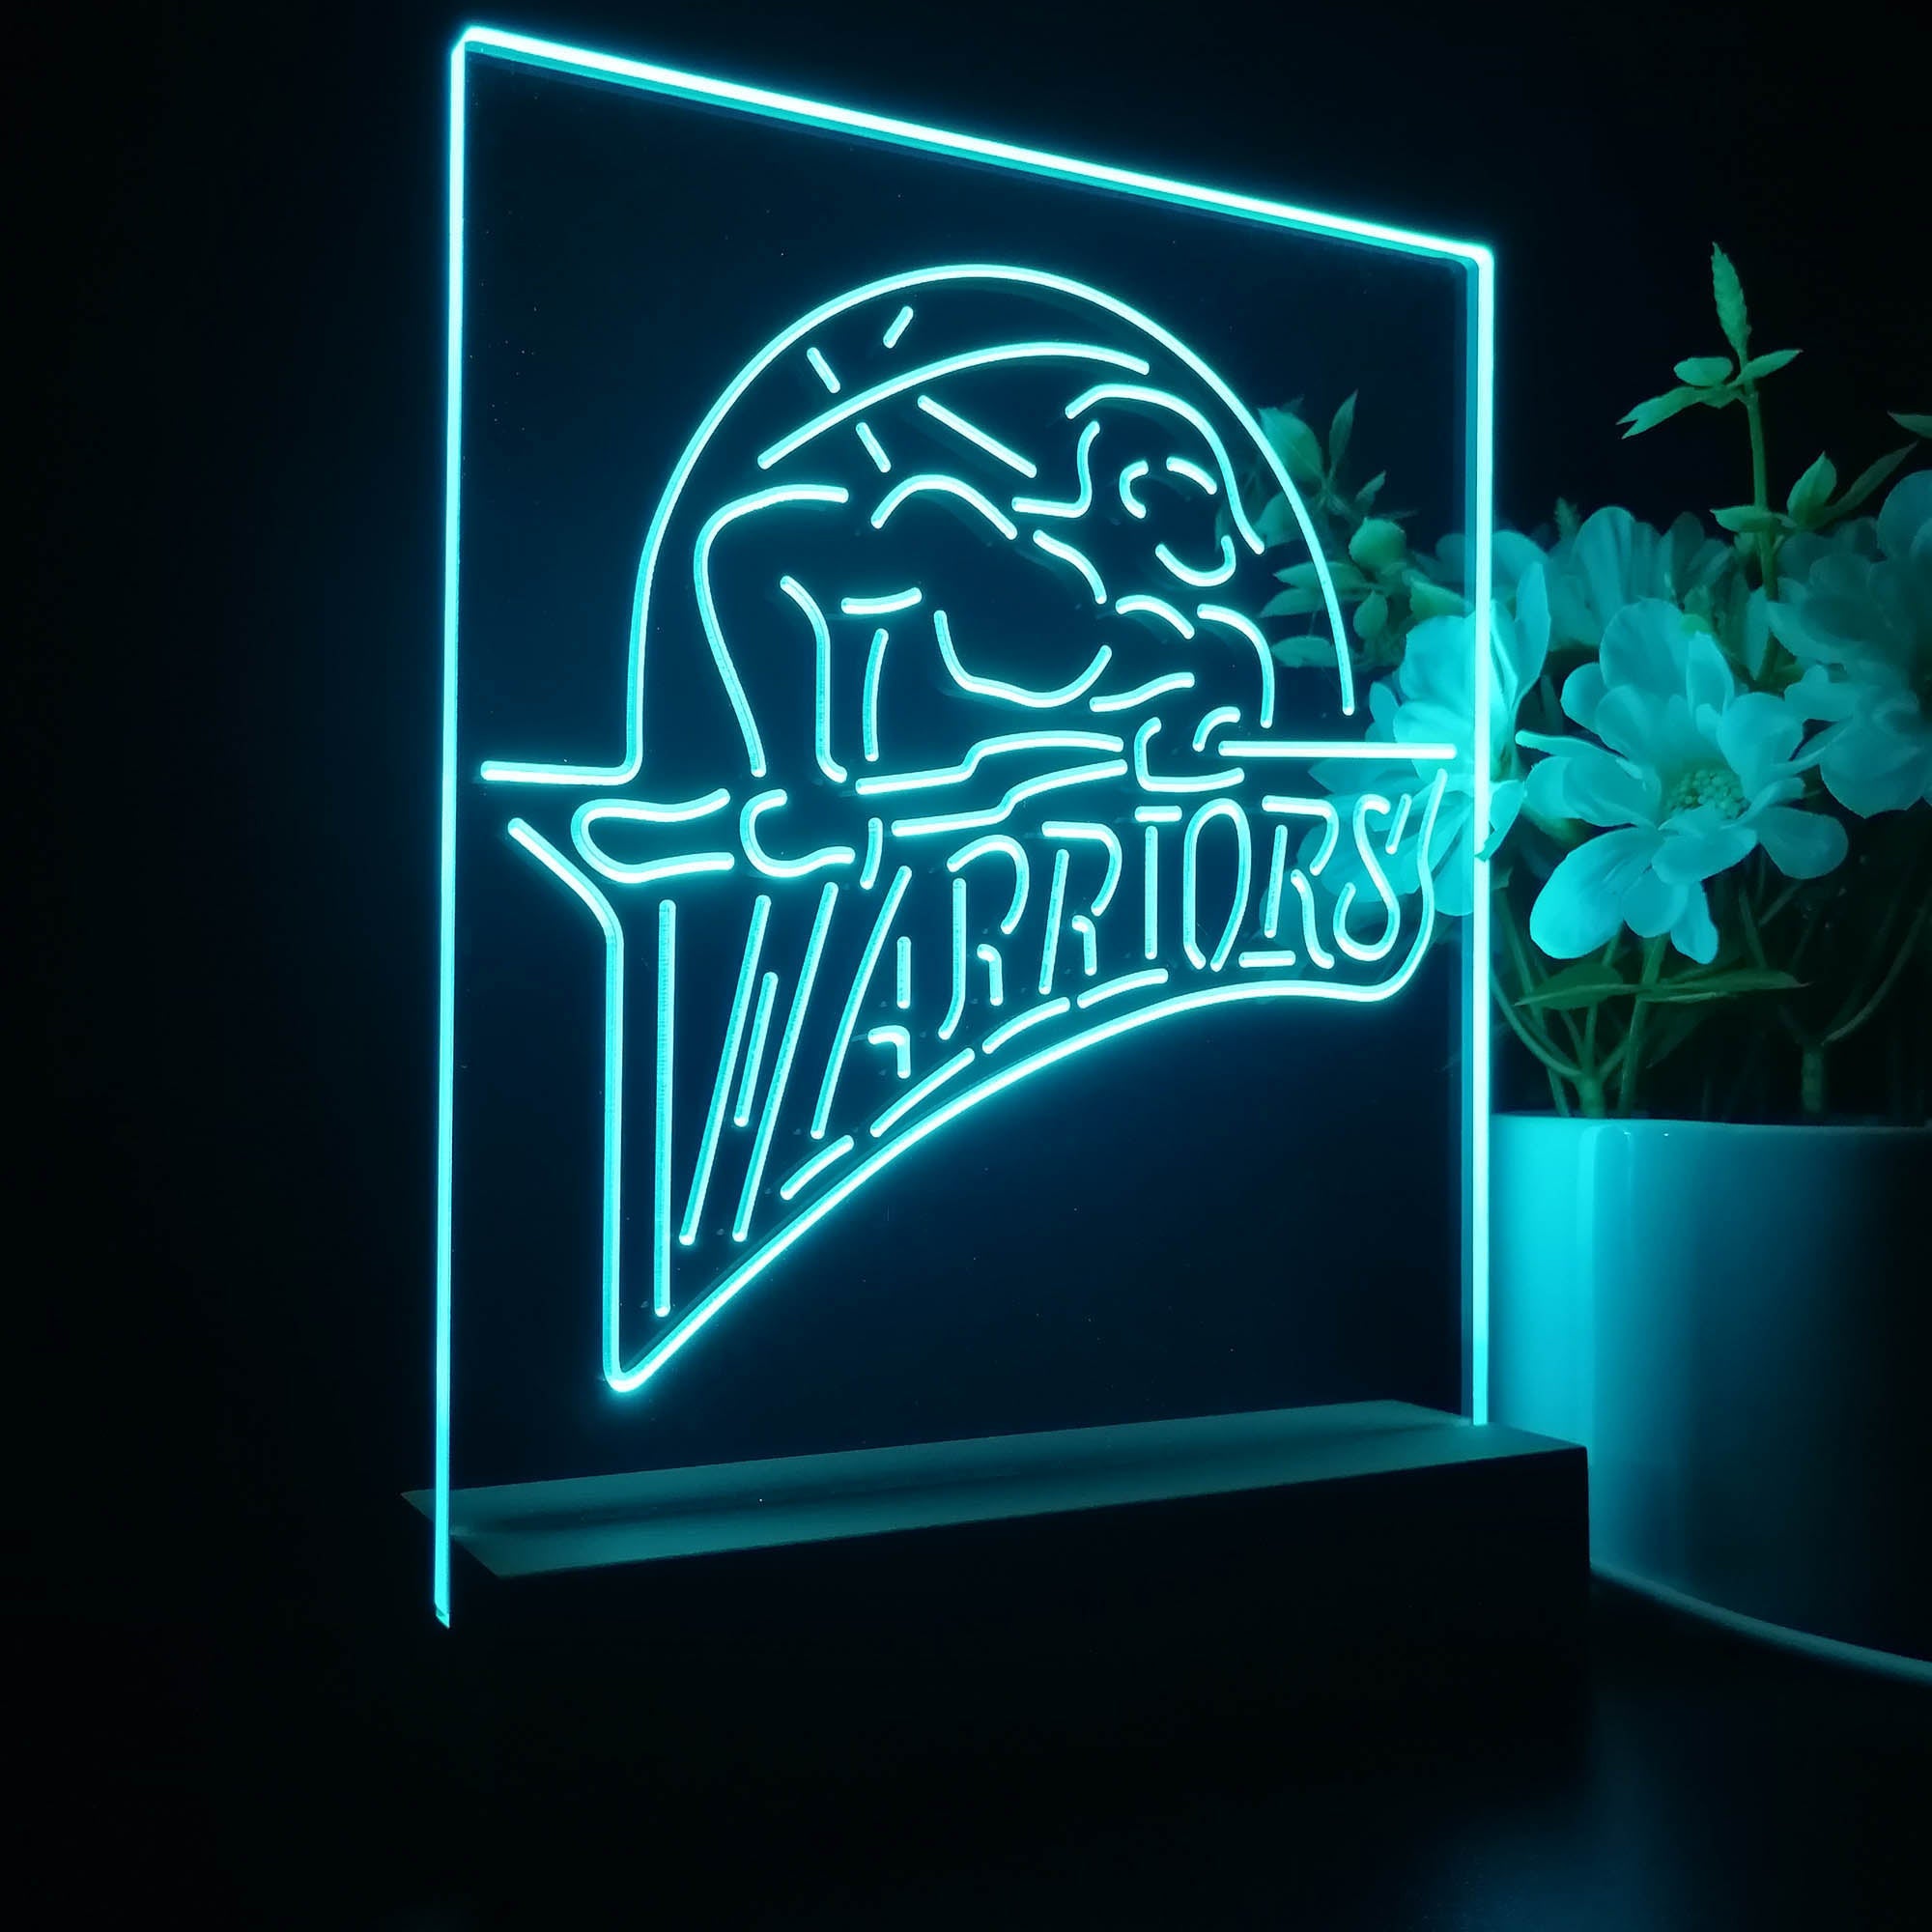 Golden State Warriors 2022 Neon Sign Table Top Lamp